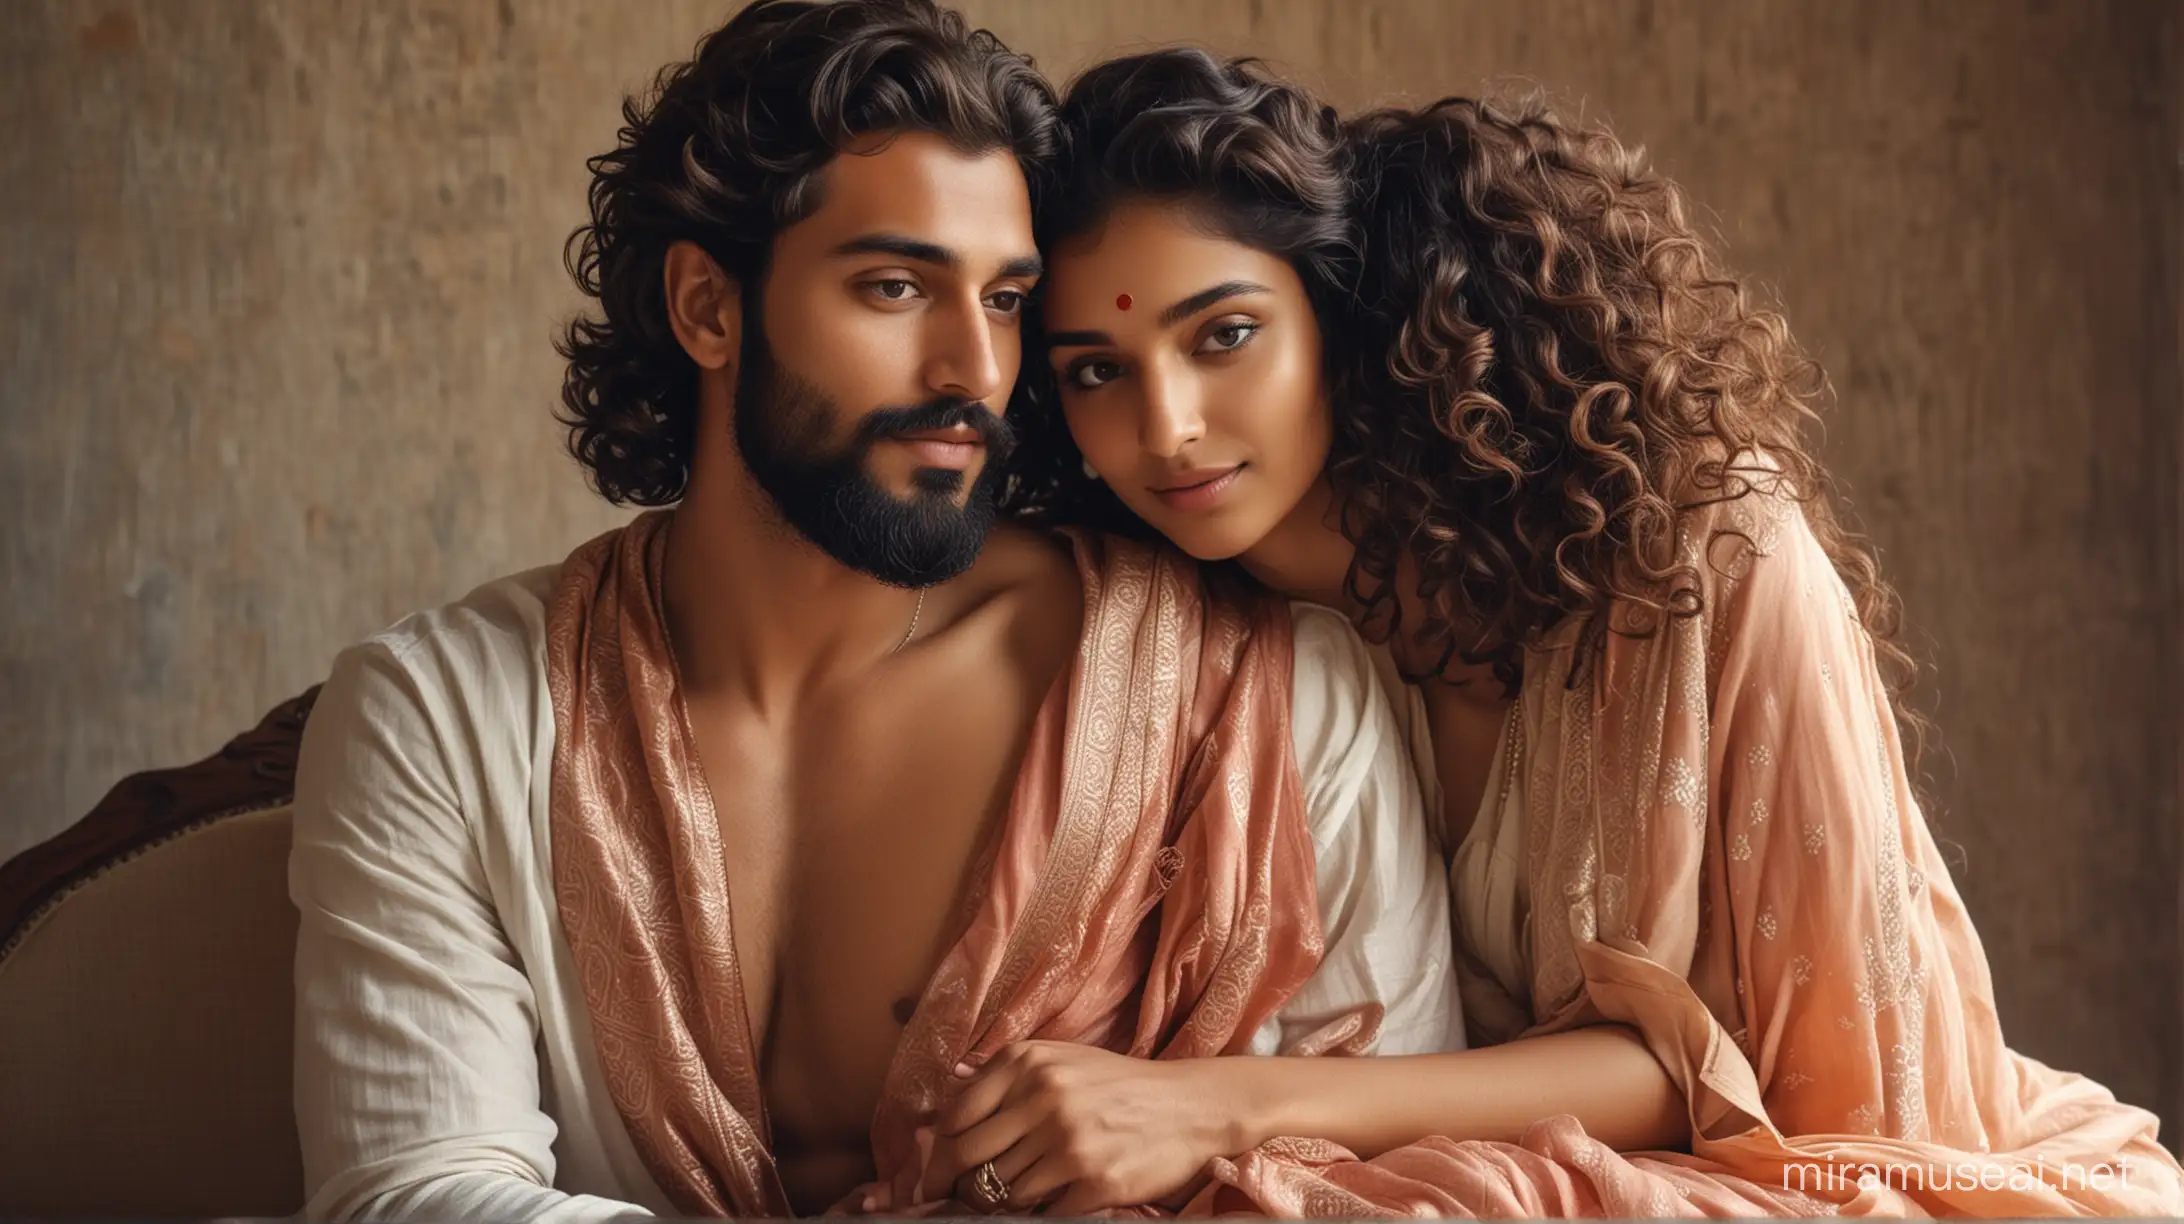 Intimate European Man and Indian Woman Embrace in Romantic Embrace